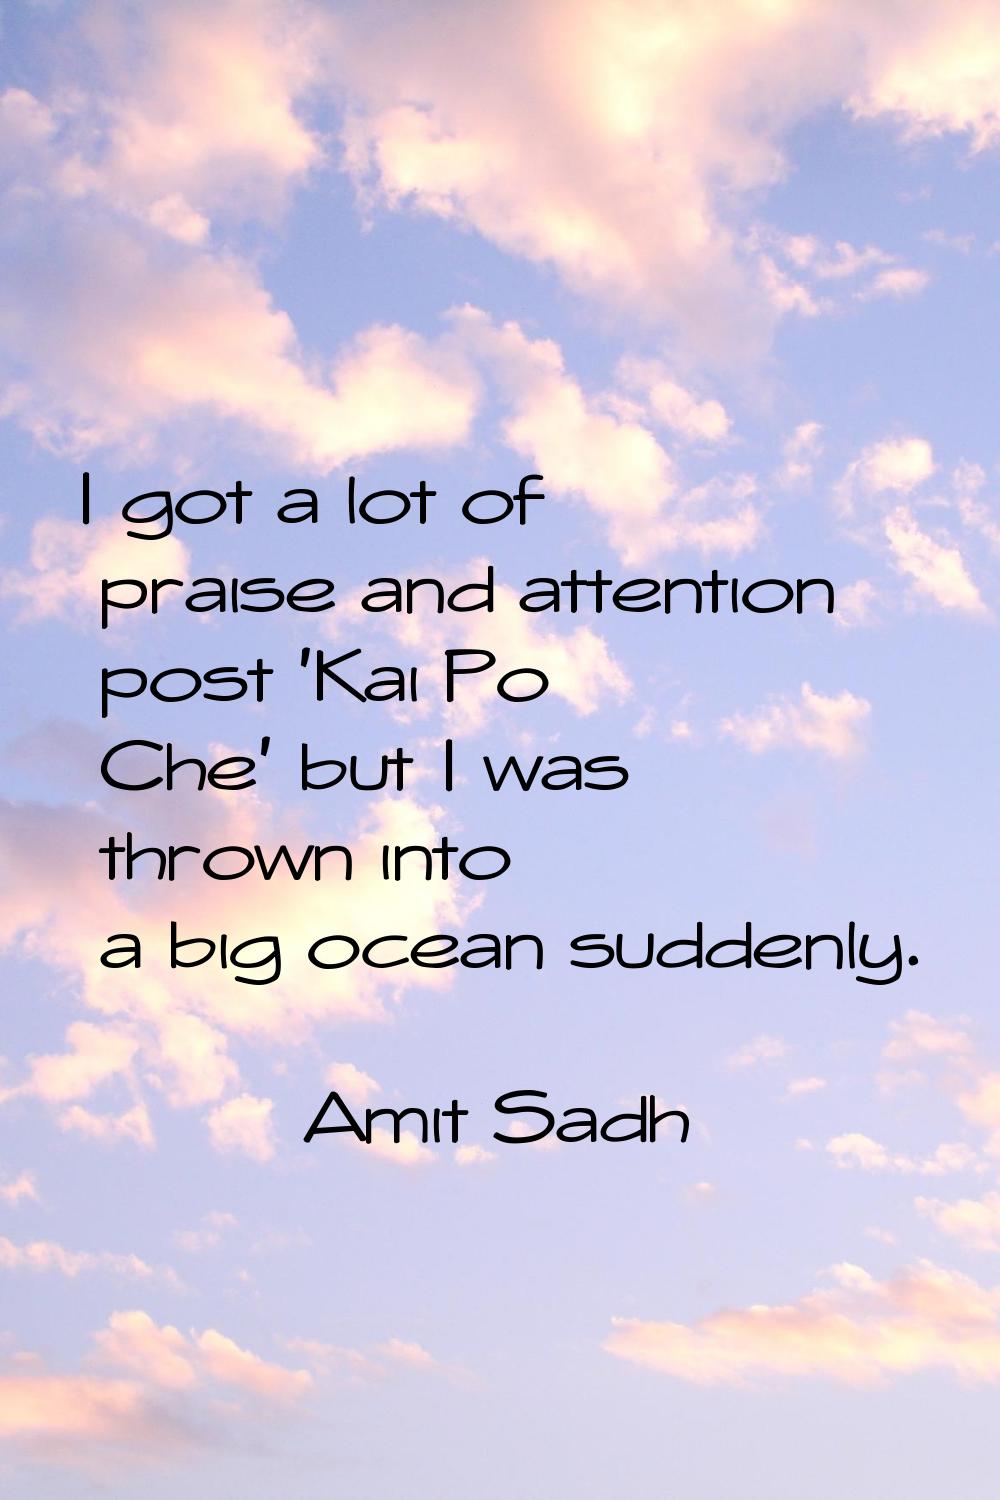 I got a lot of praise and attention post 'Kai Po Che' but I was thrown into a big ocean suddenly.